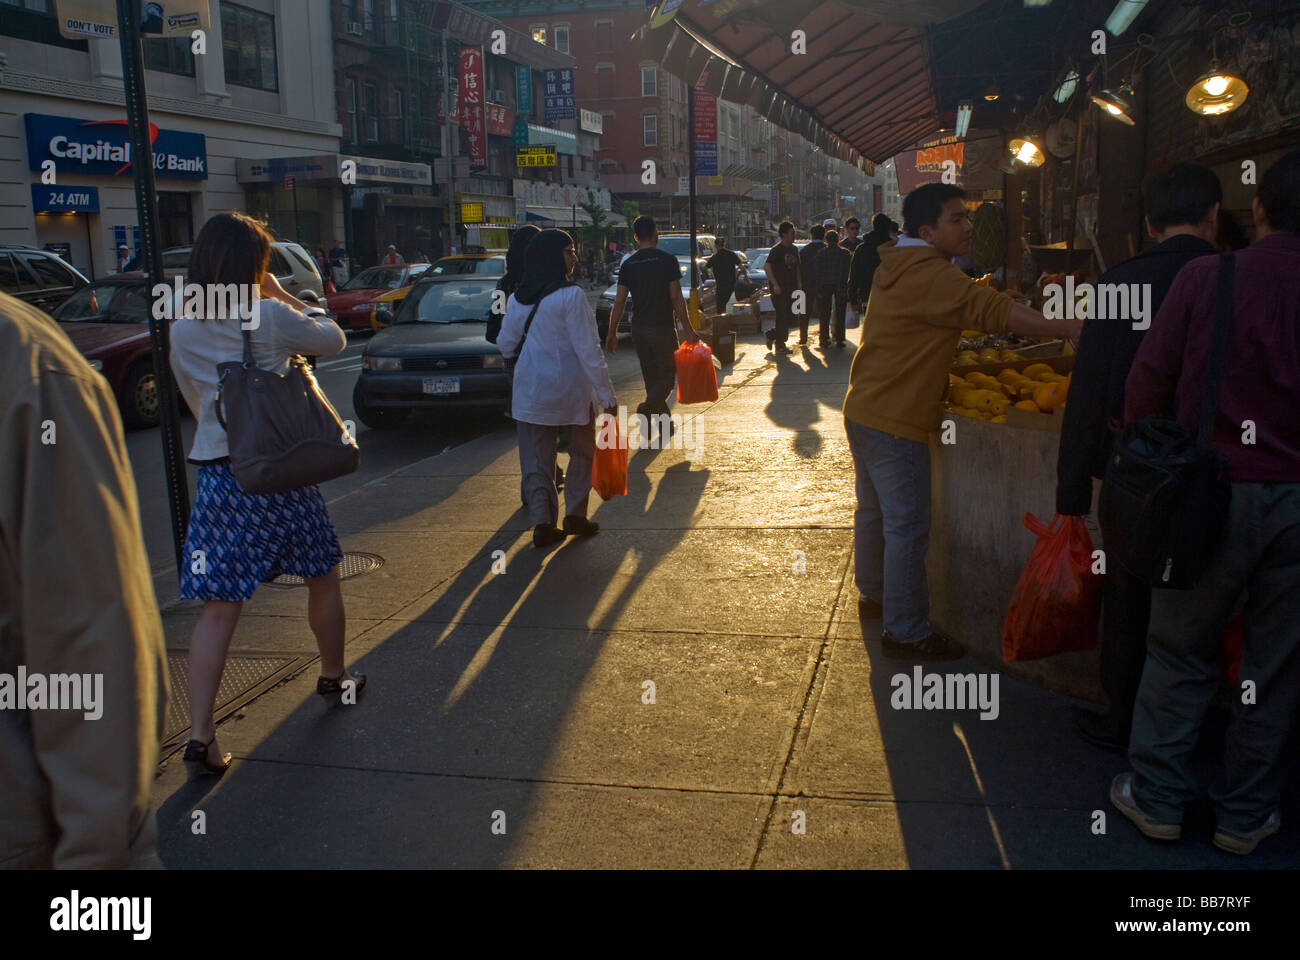 Shoppers in Chinatown in New York hurry home with plastic shopping bags filled with their purchases Stock Photo